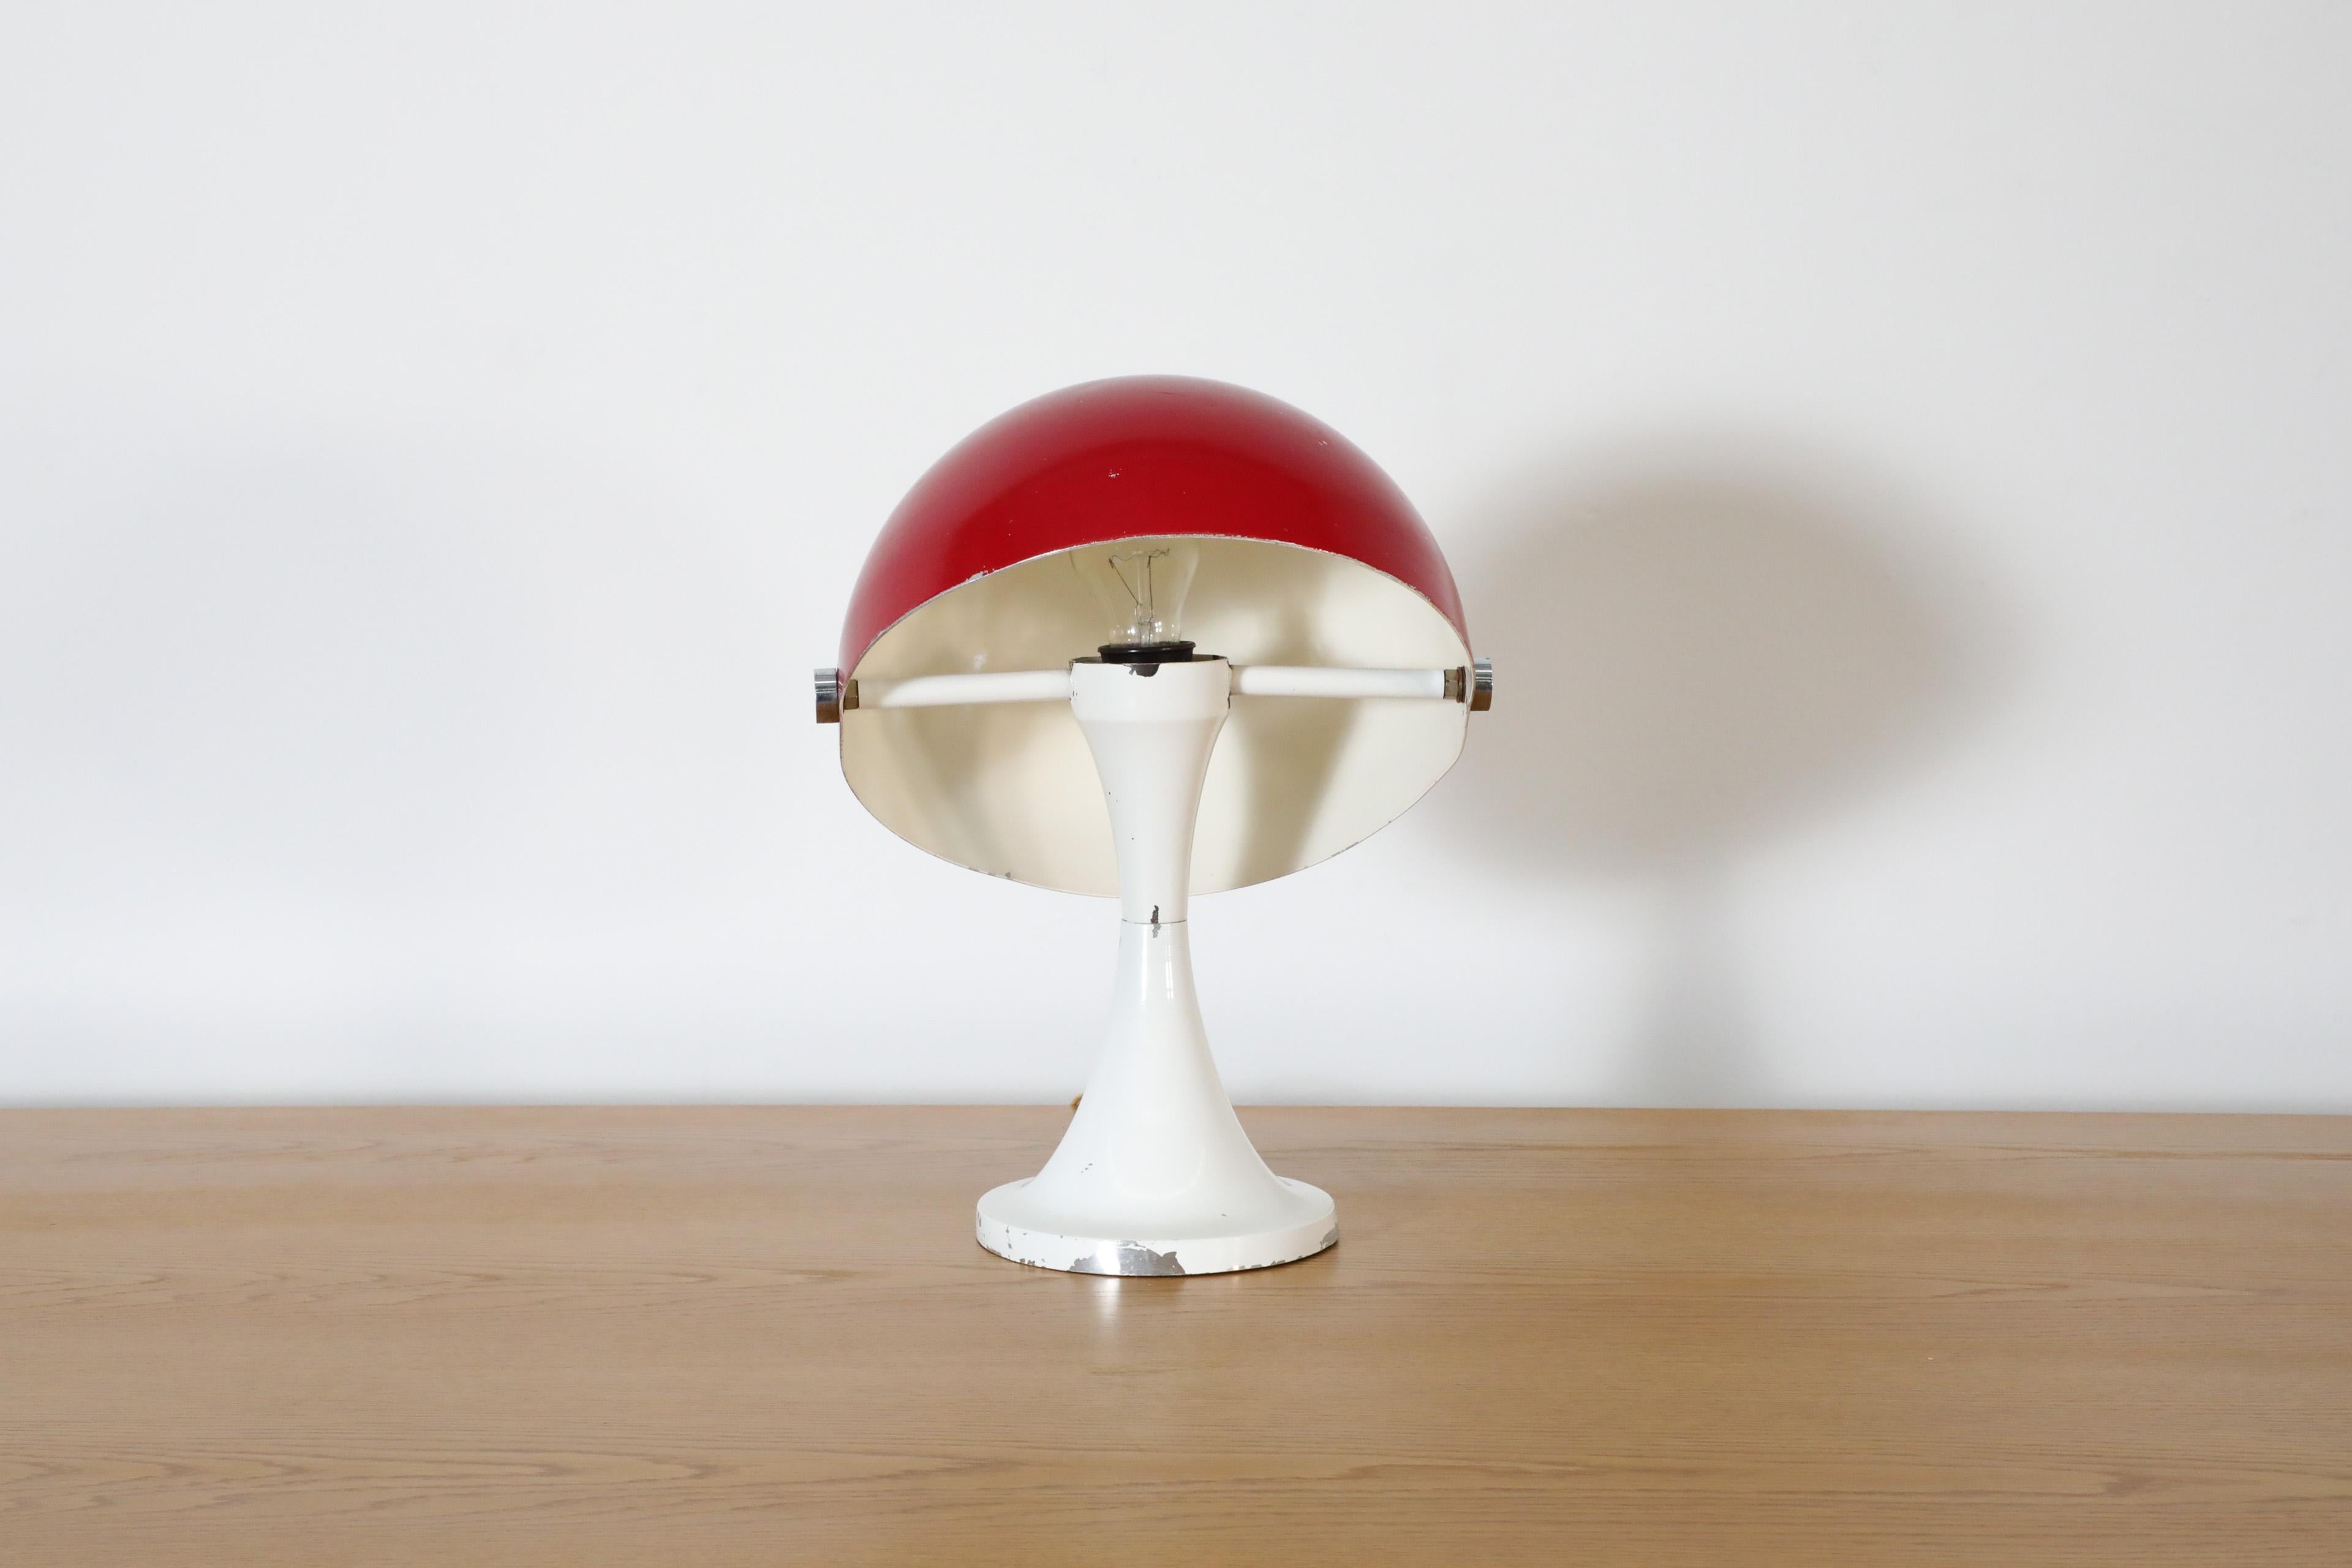 Enameled Martinelli Luce Inspired Red & White Mushroom Table Lamp with Rotating Shade